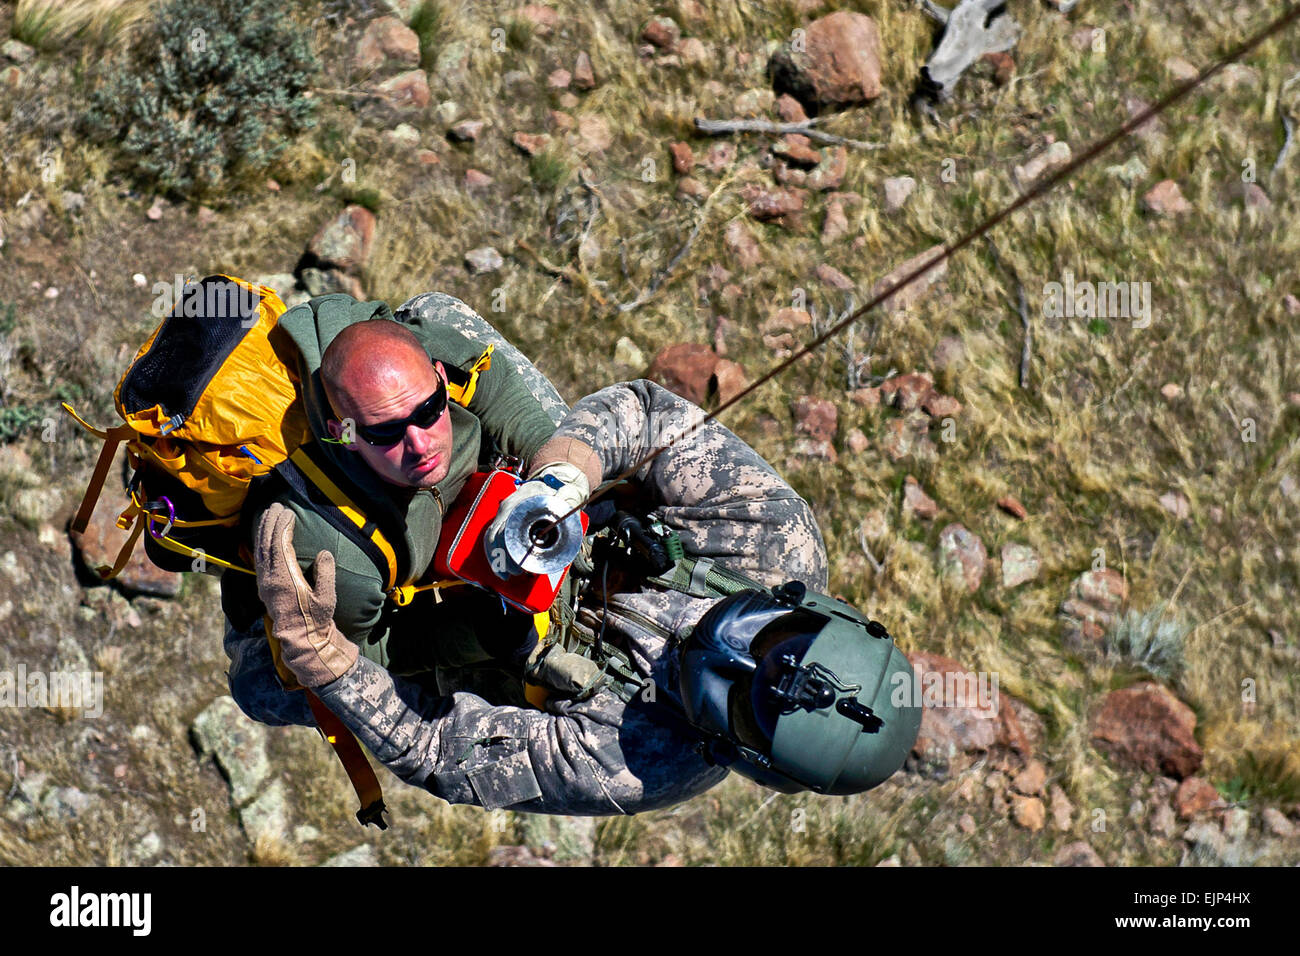 U.S. Army Sgt. Nathan McLaughlin, a standardization instructor from C Company, 1-171 Medevac, Utah Army National Guard, West Jordan, Utah, rescues a lost hiker, Staff Sgt. Christian Larsen, a medic from C Company, 1-171 Medevac, Utah Army National Guard, West Jordan, Utah, during a search and rescue training exercise, on Camp W.G. Williams, Riverton, Utah, April 3, 2012. Stock Photo